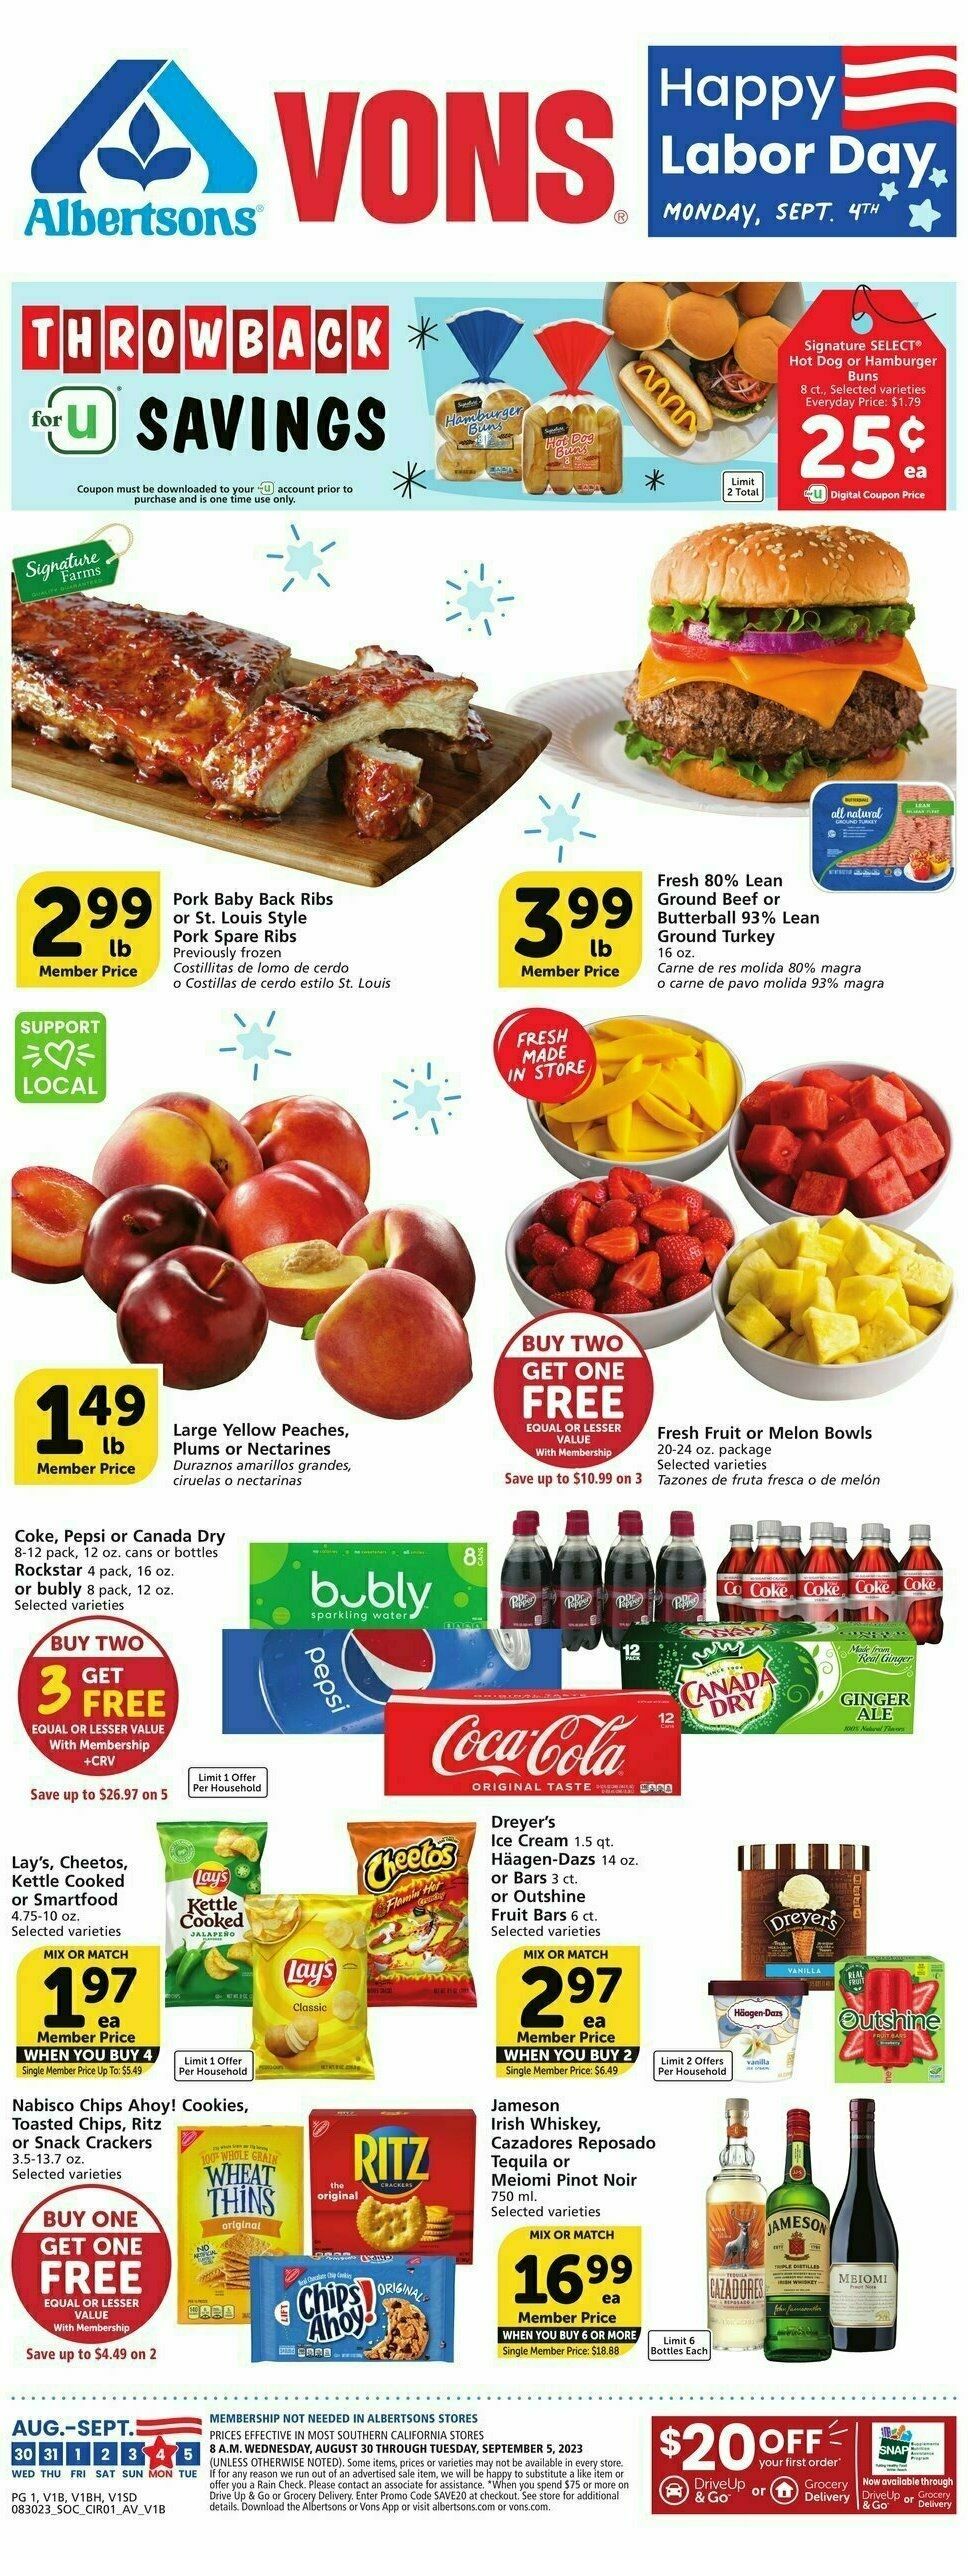 Vons Weekly Ad from August 30